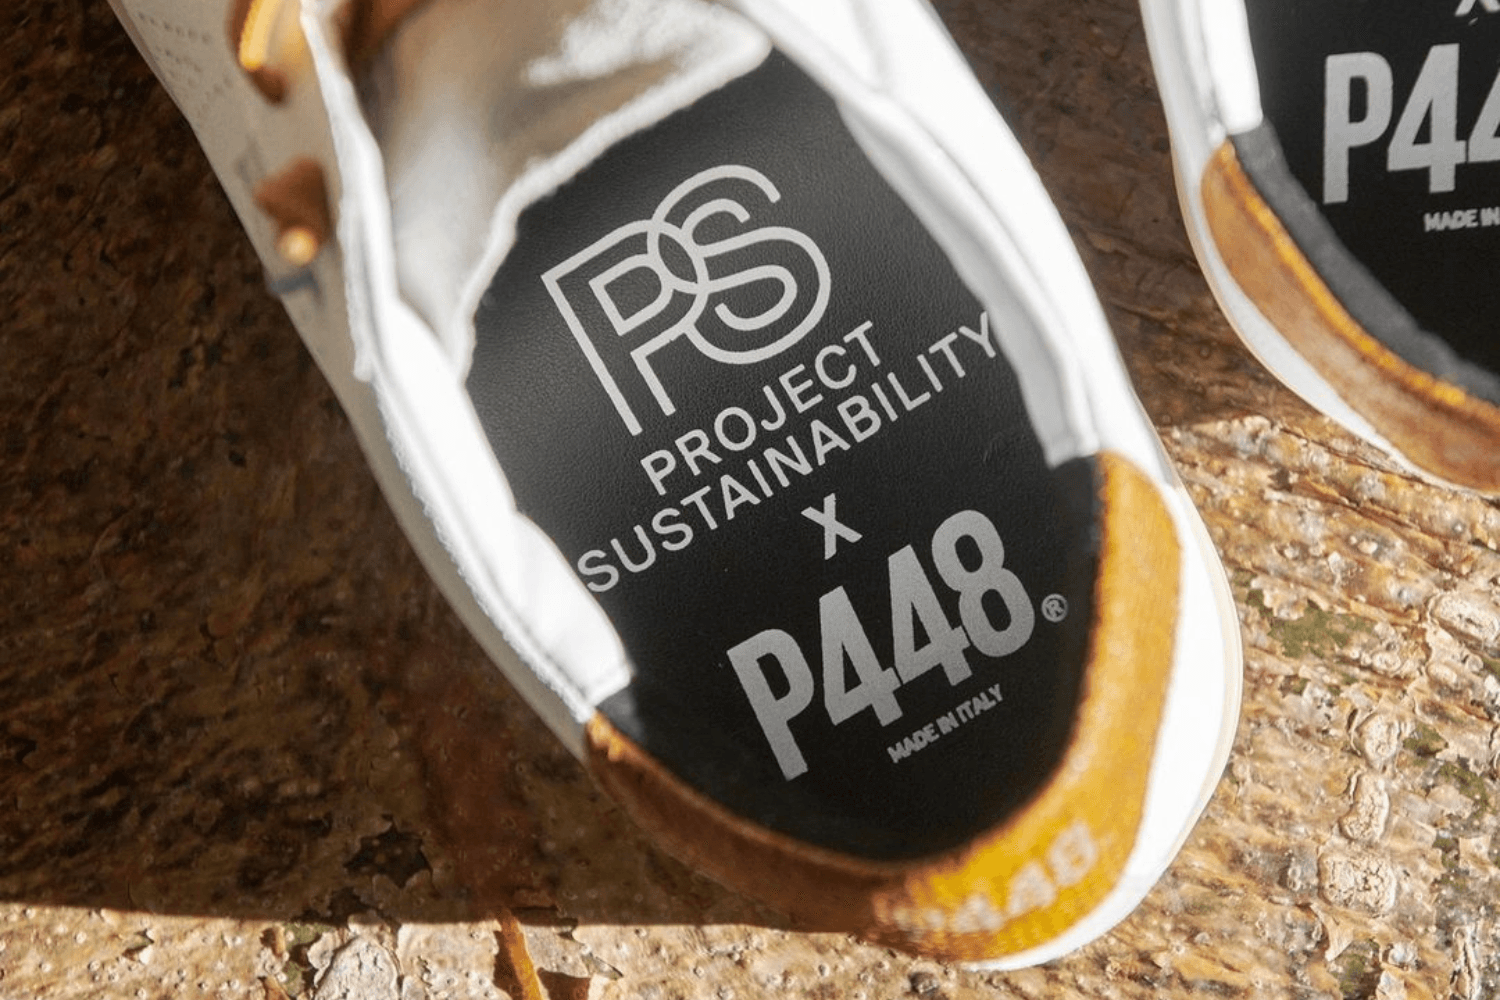 P448 makes Sneakers from Lionfish Leather